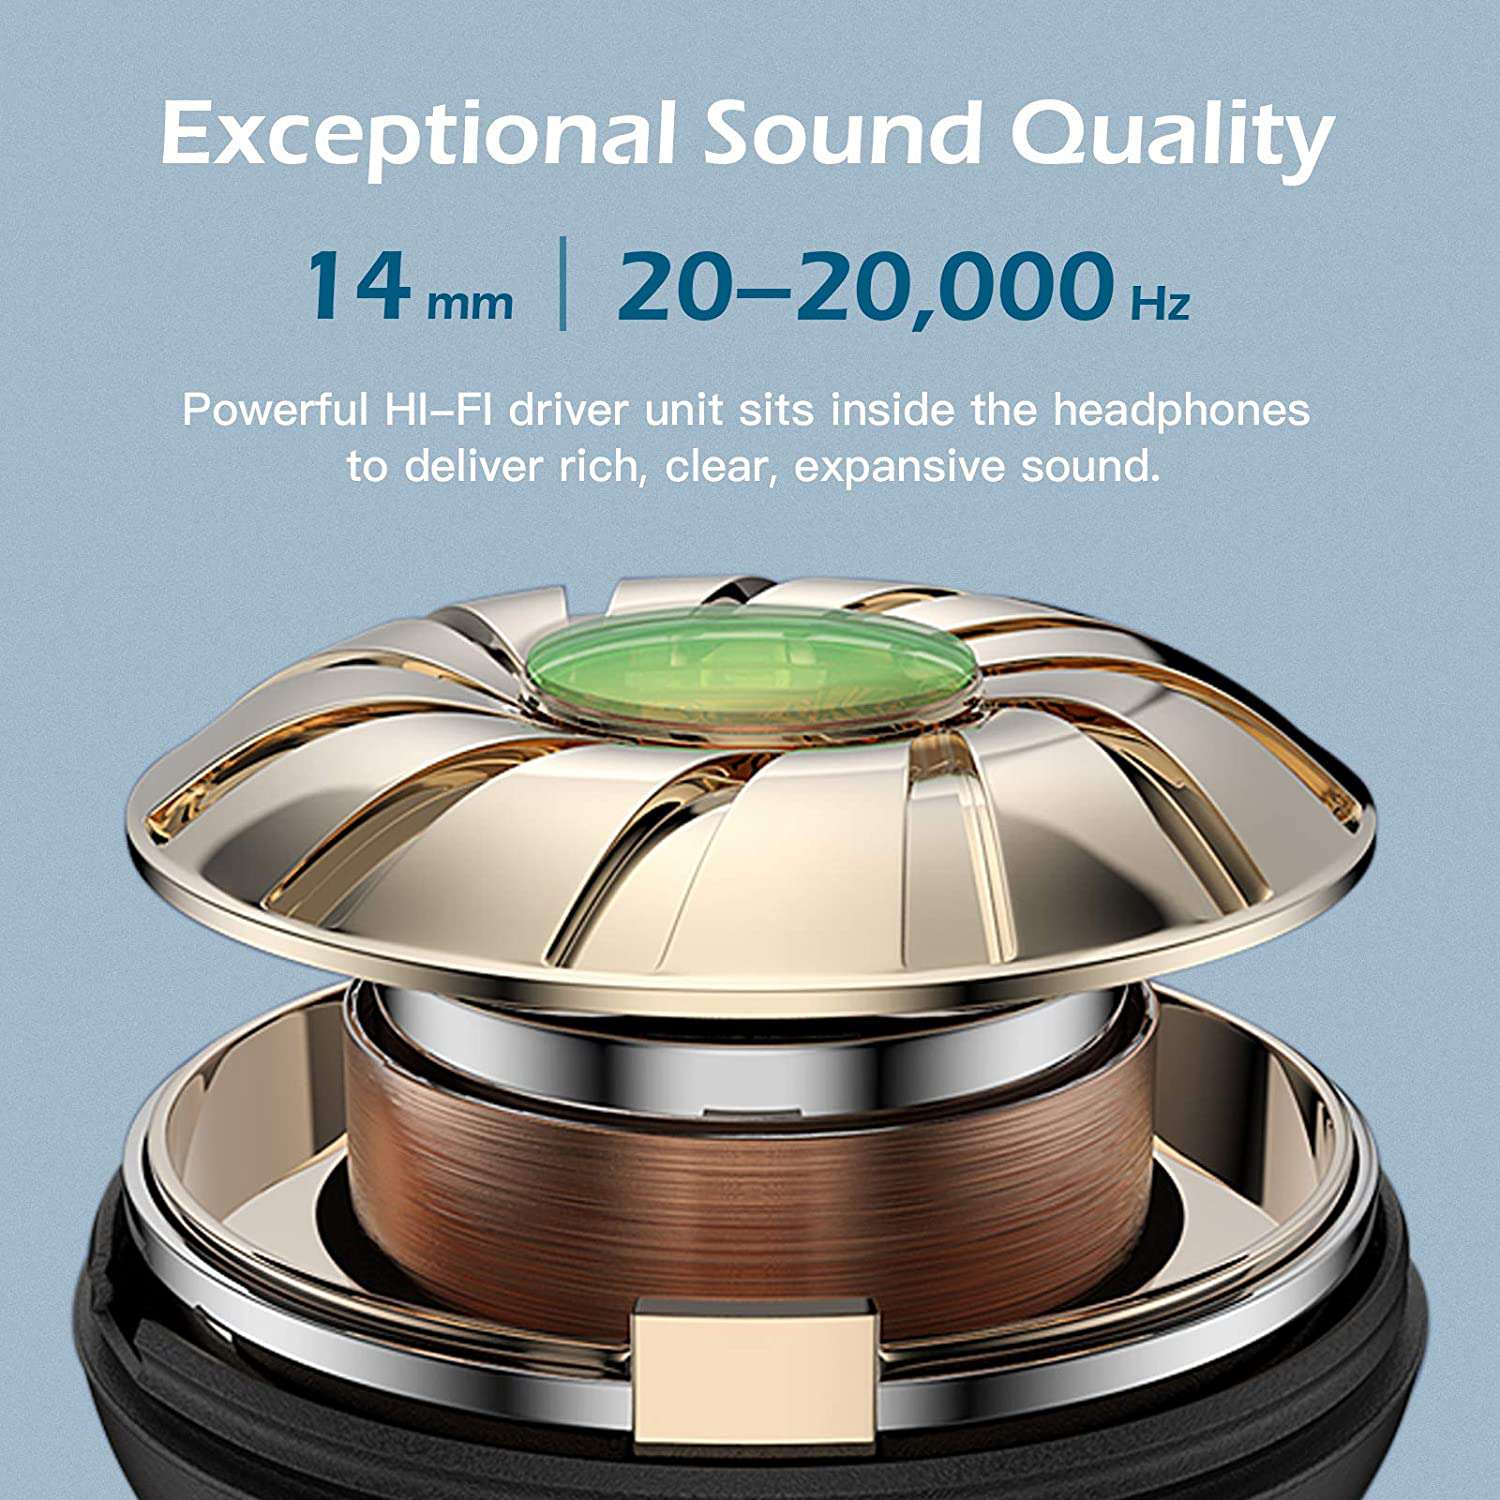 Powerful 14mm HI-Fl driver unit delivers rich, clear sound from 20Hz to 20kHz.